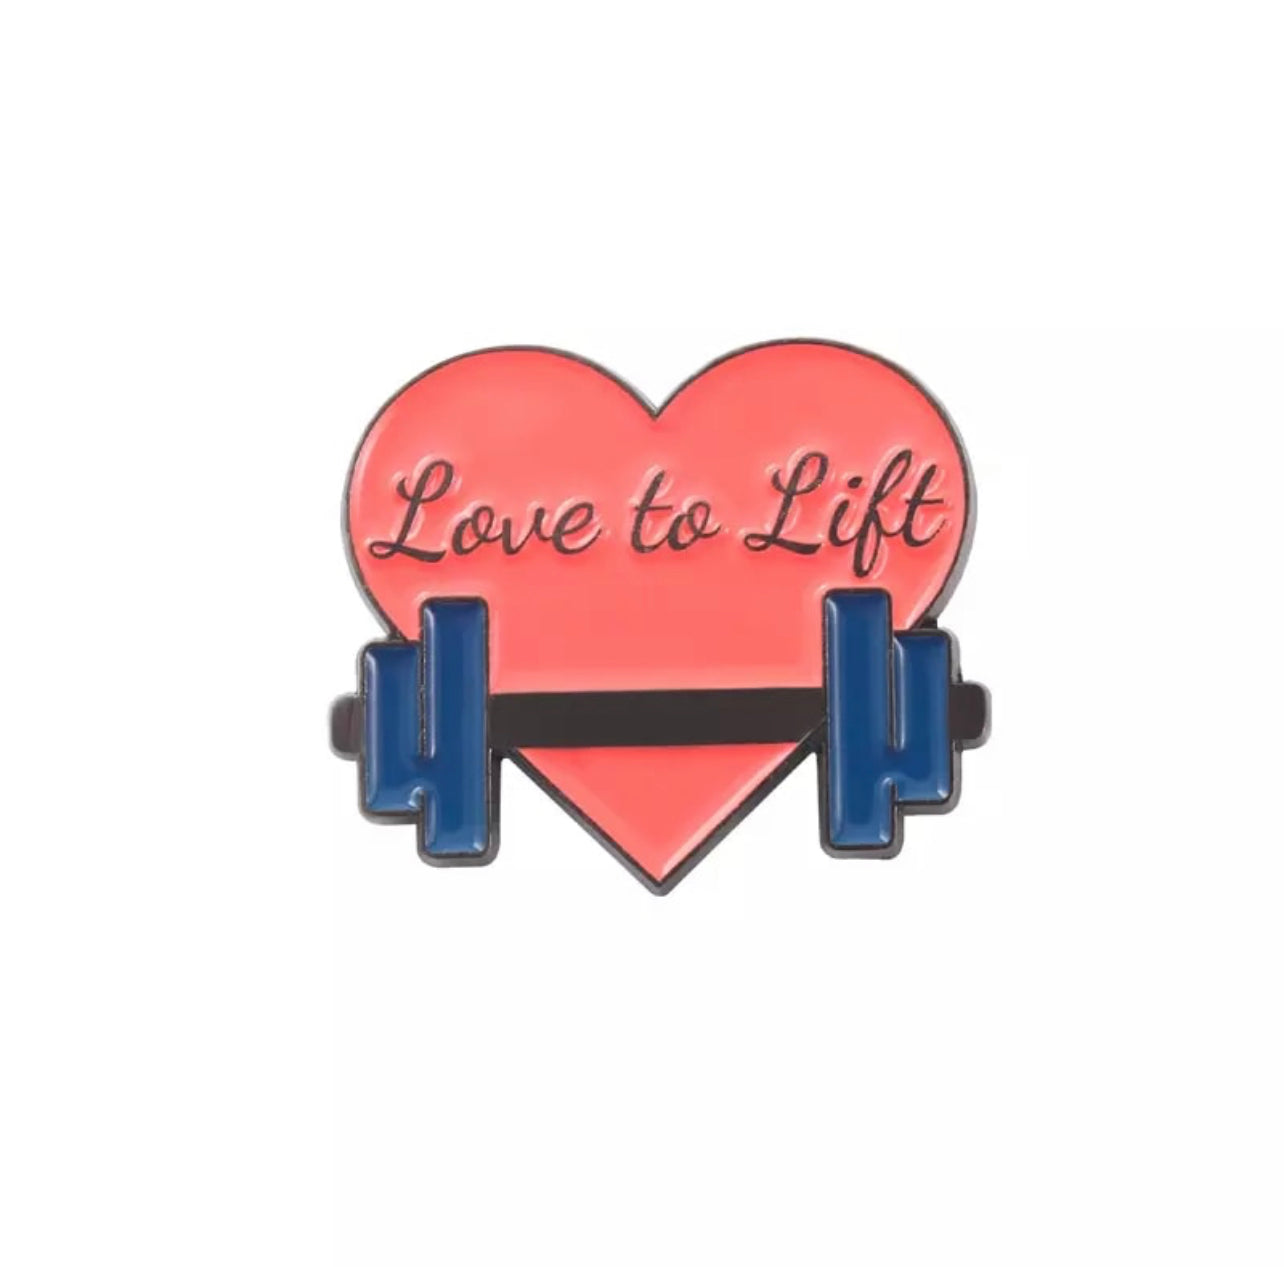 Love to lift